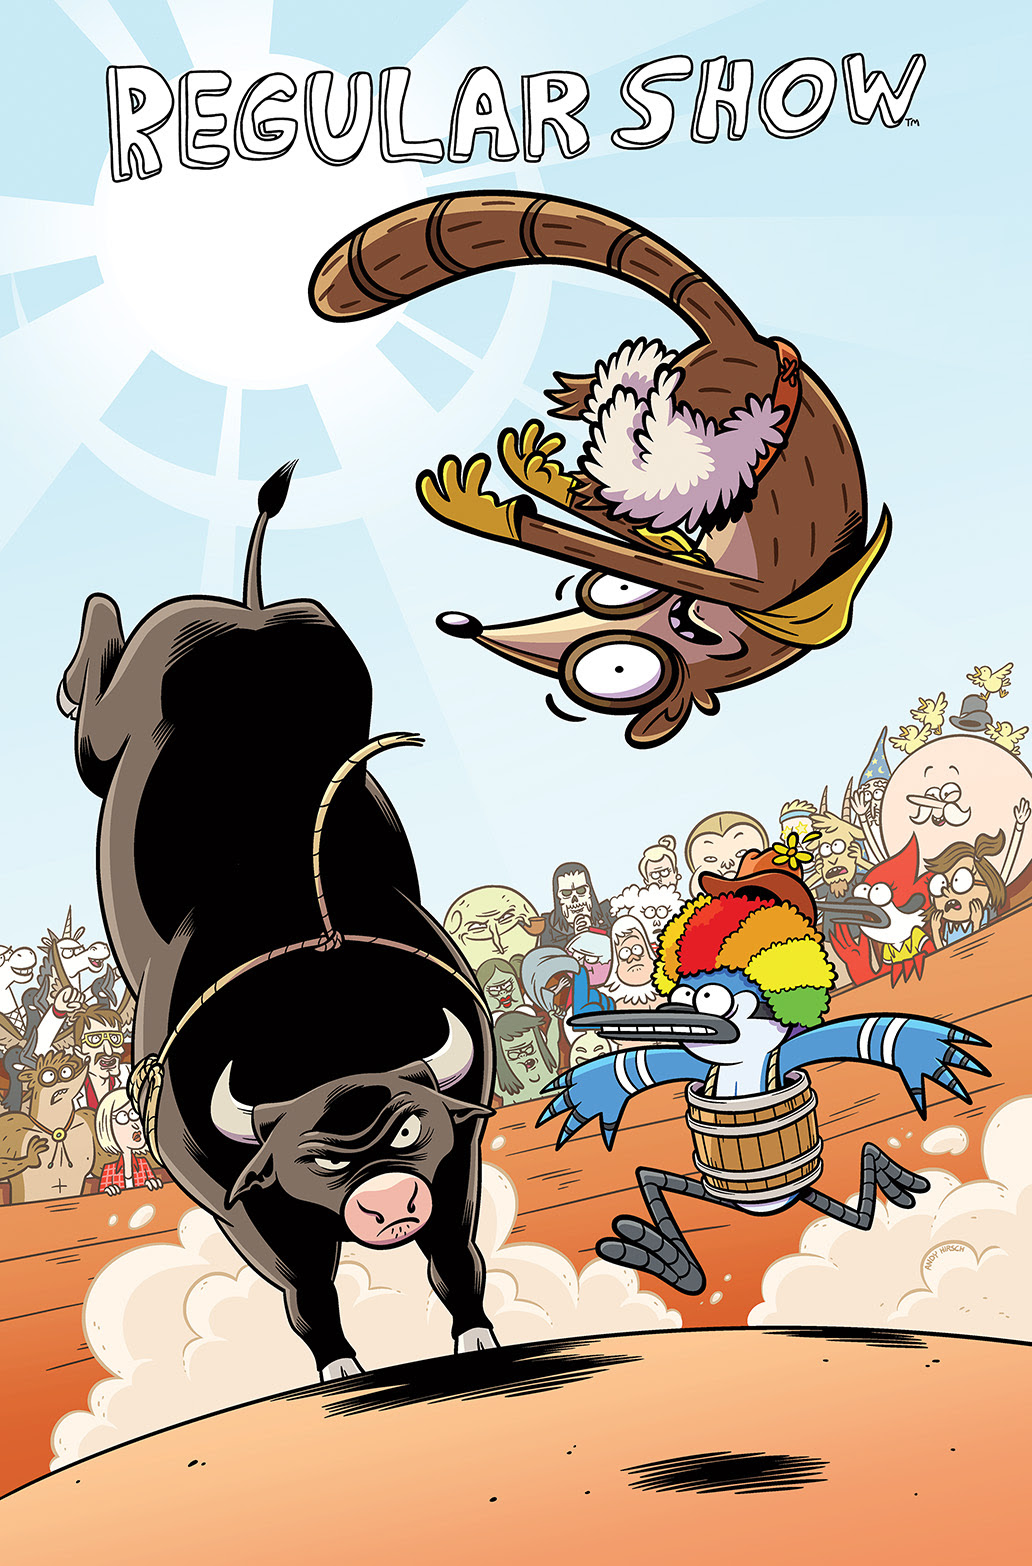 REGULAR SHOW #15 Cover A by Andy Hirsch